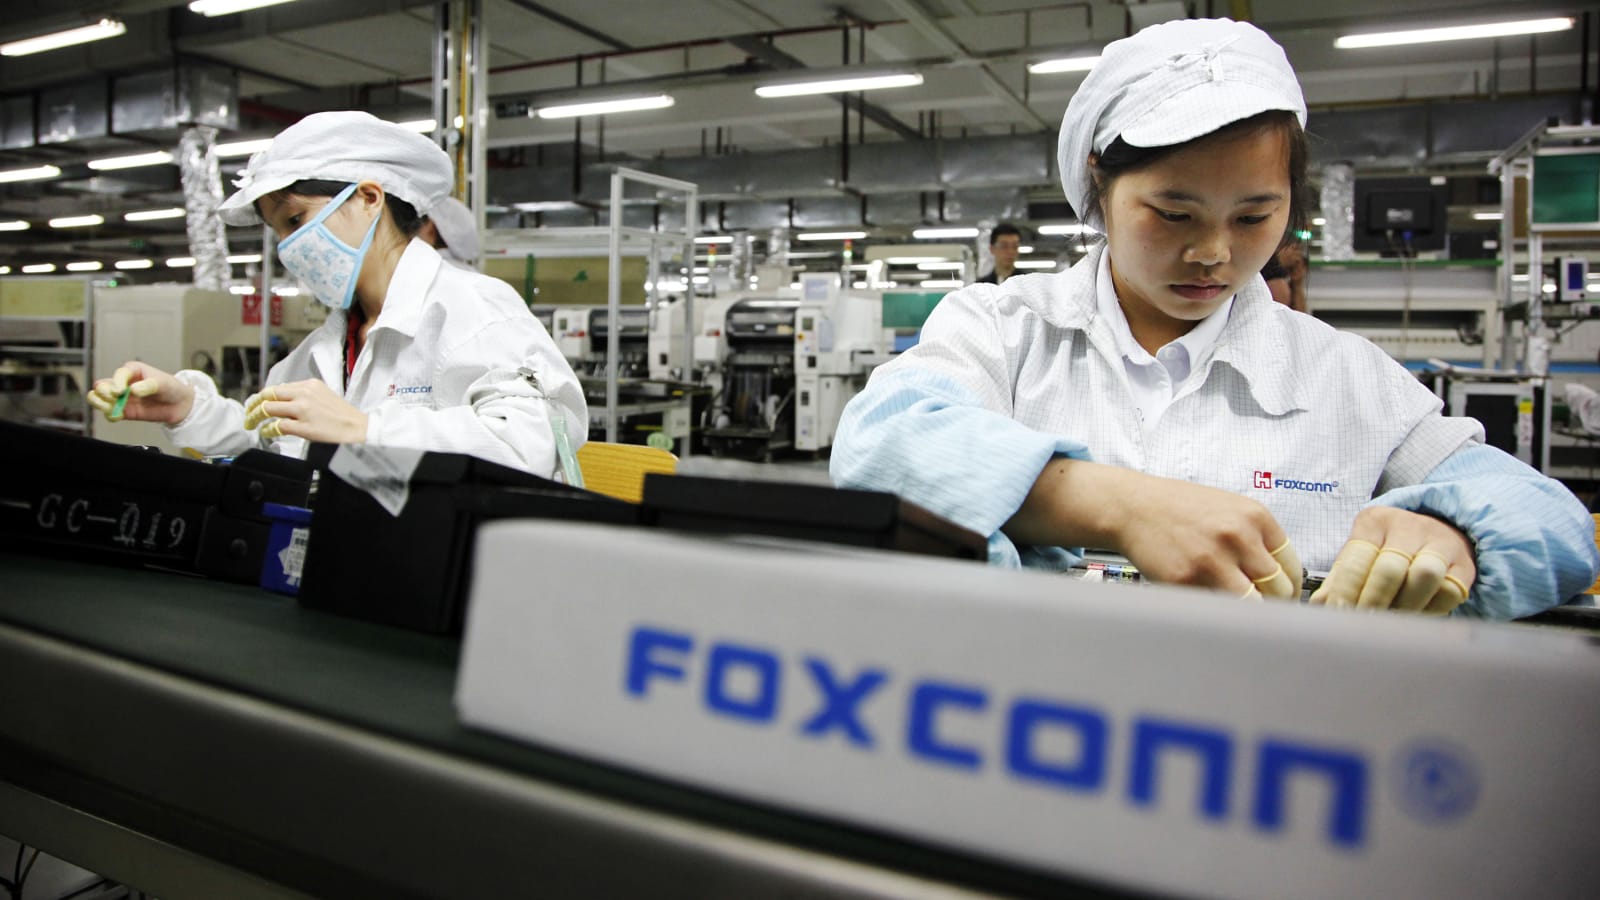 100642777 foxconn worker assembly line gettyp